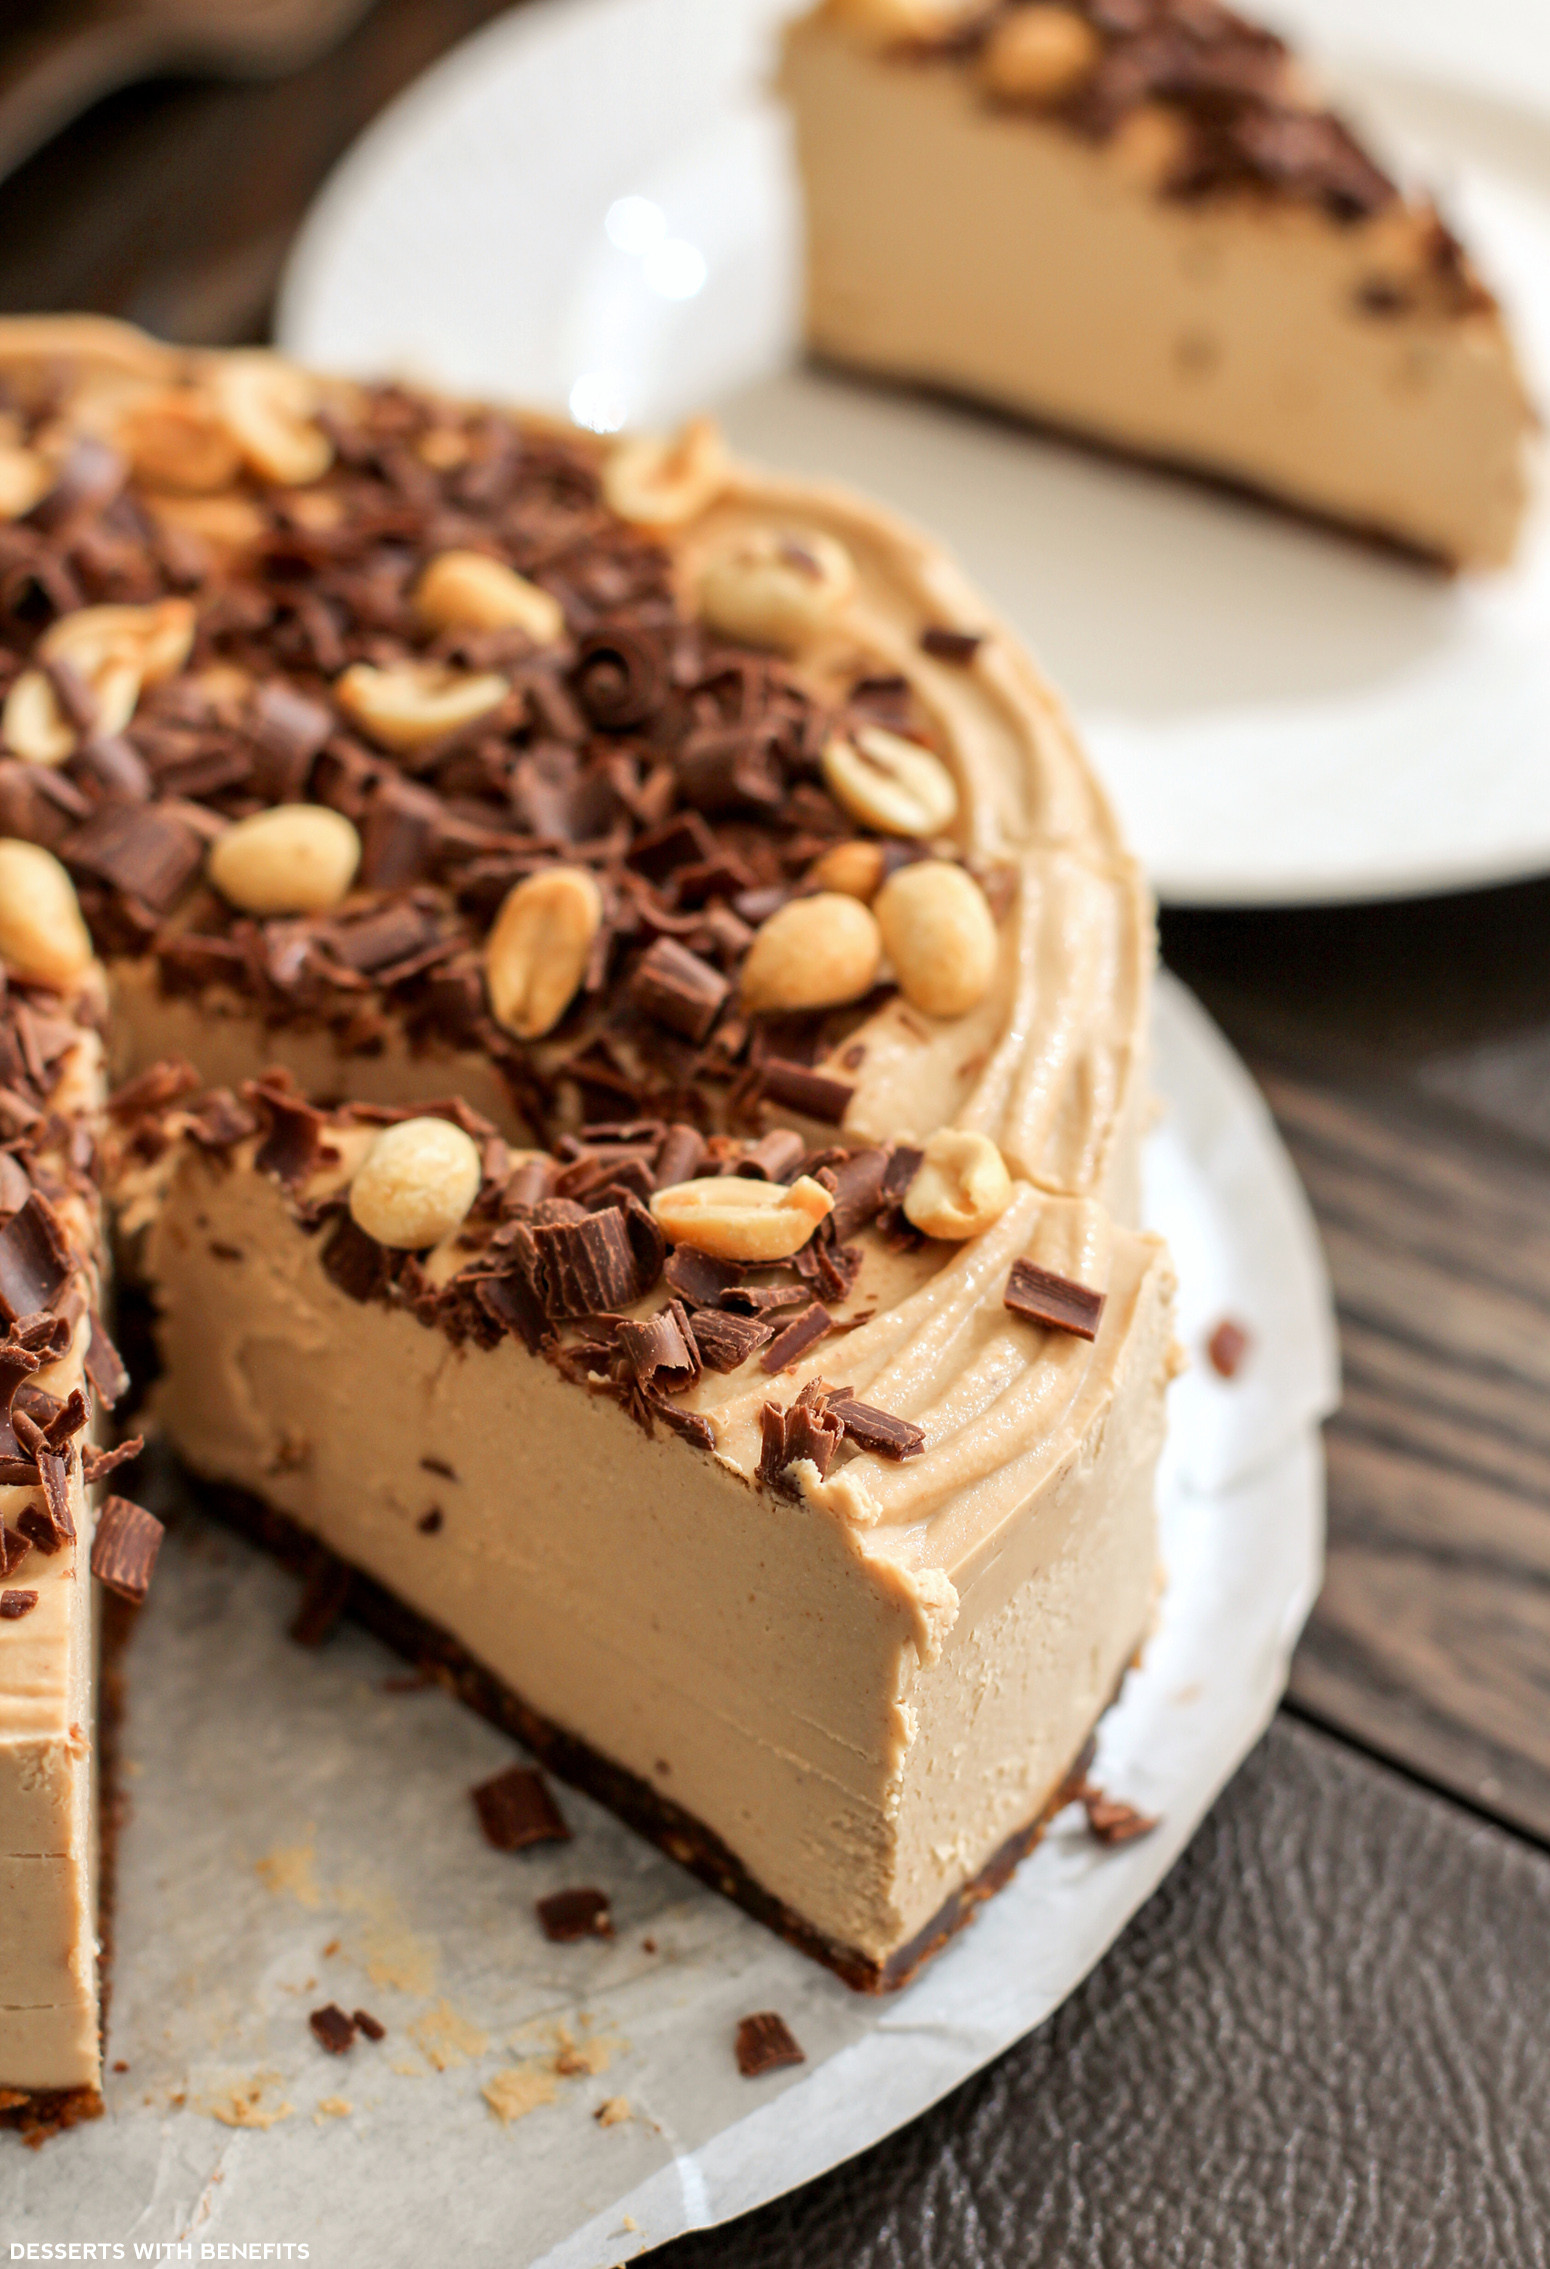 Healthy Chocolate Dessert Recipes
 Healthy Chocolate Peanut Butter Raw Cheesecake